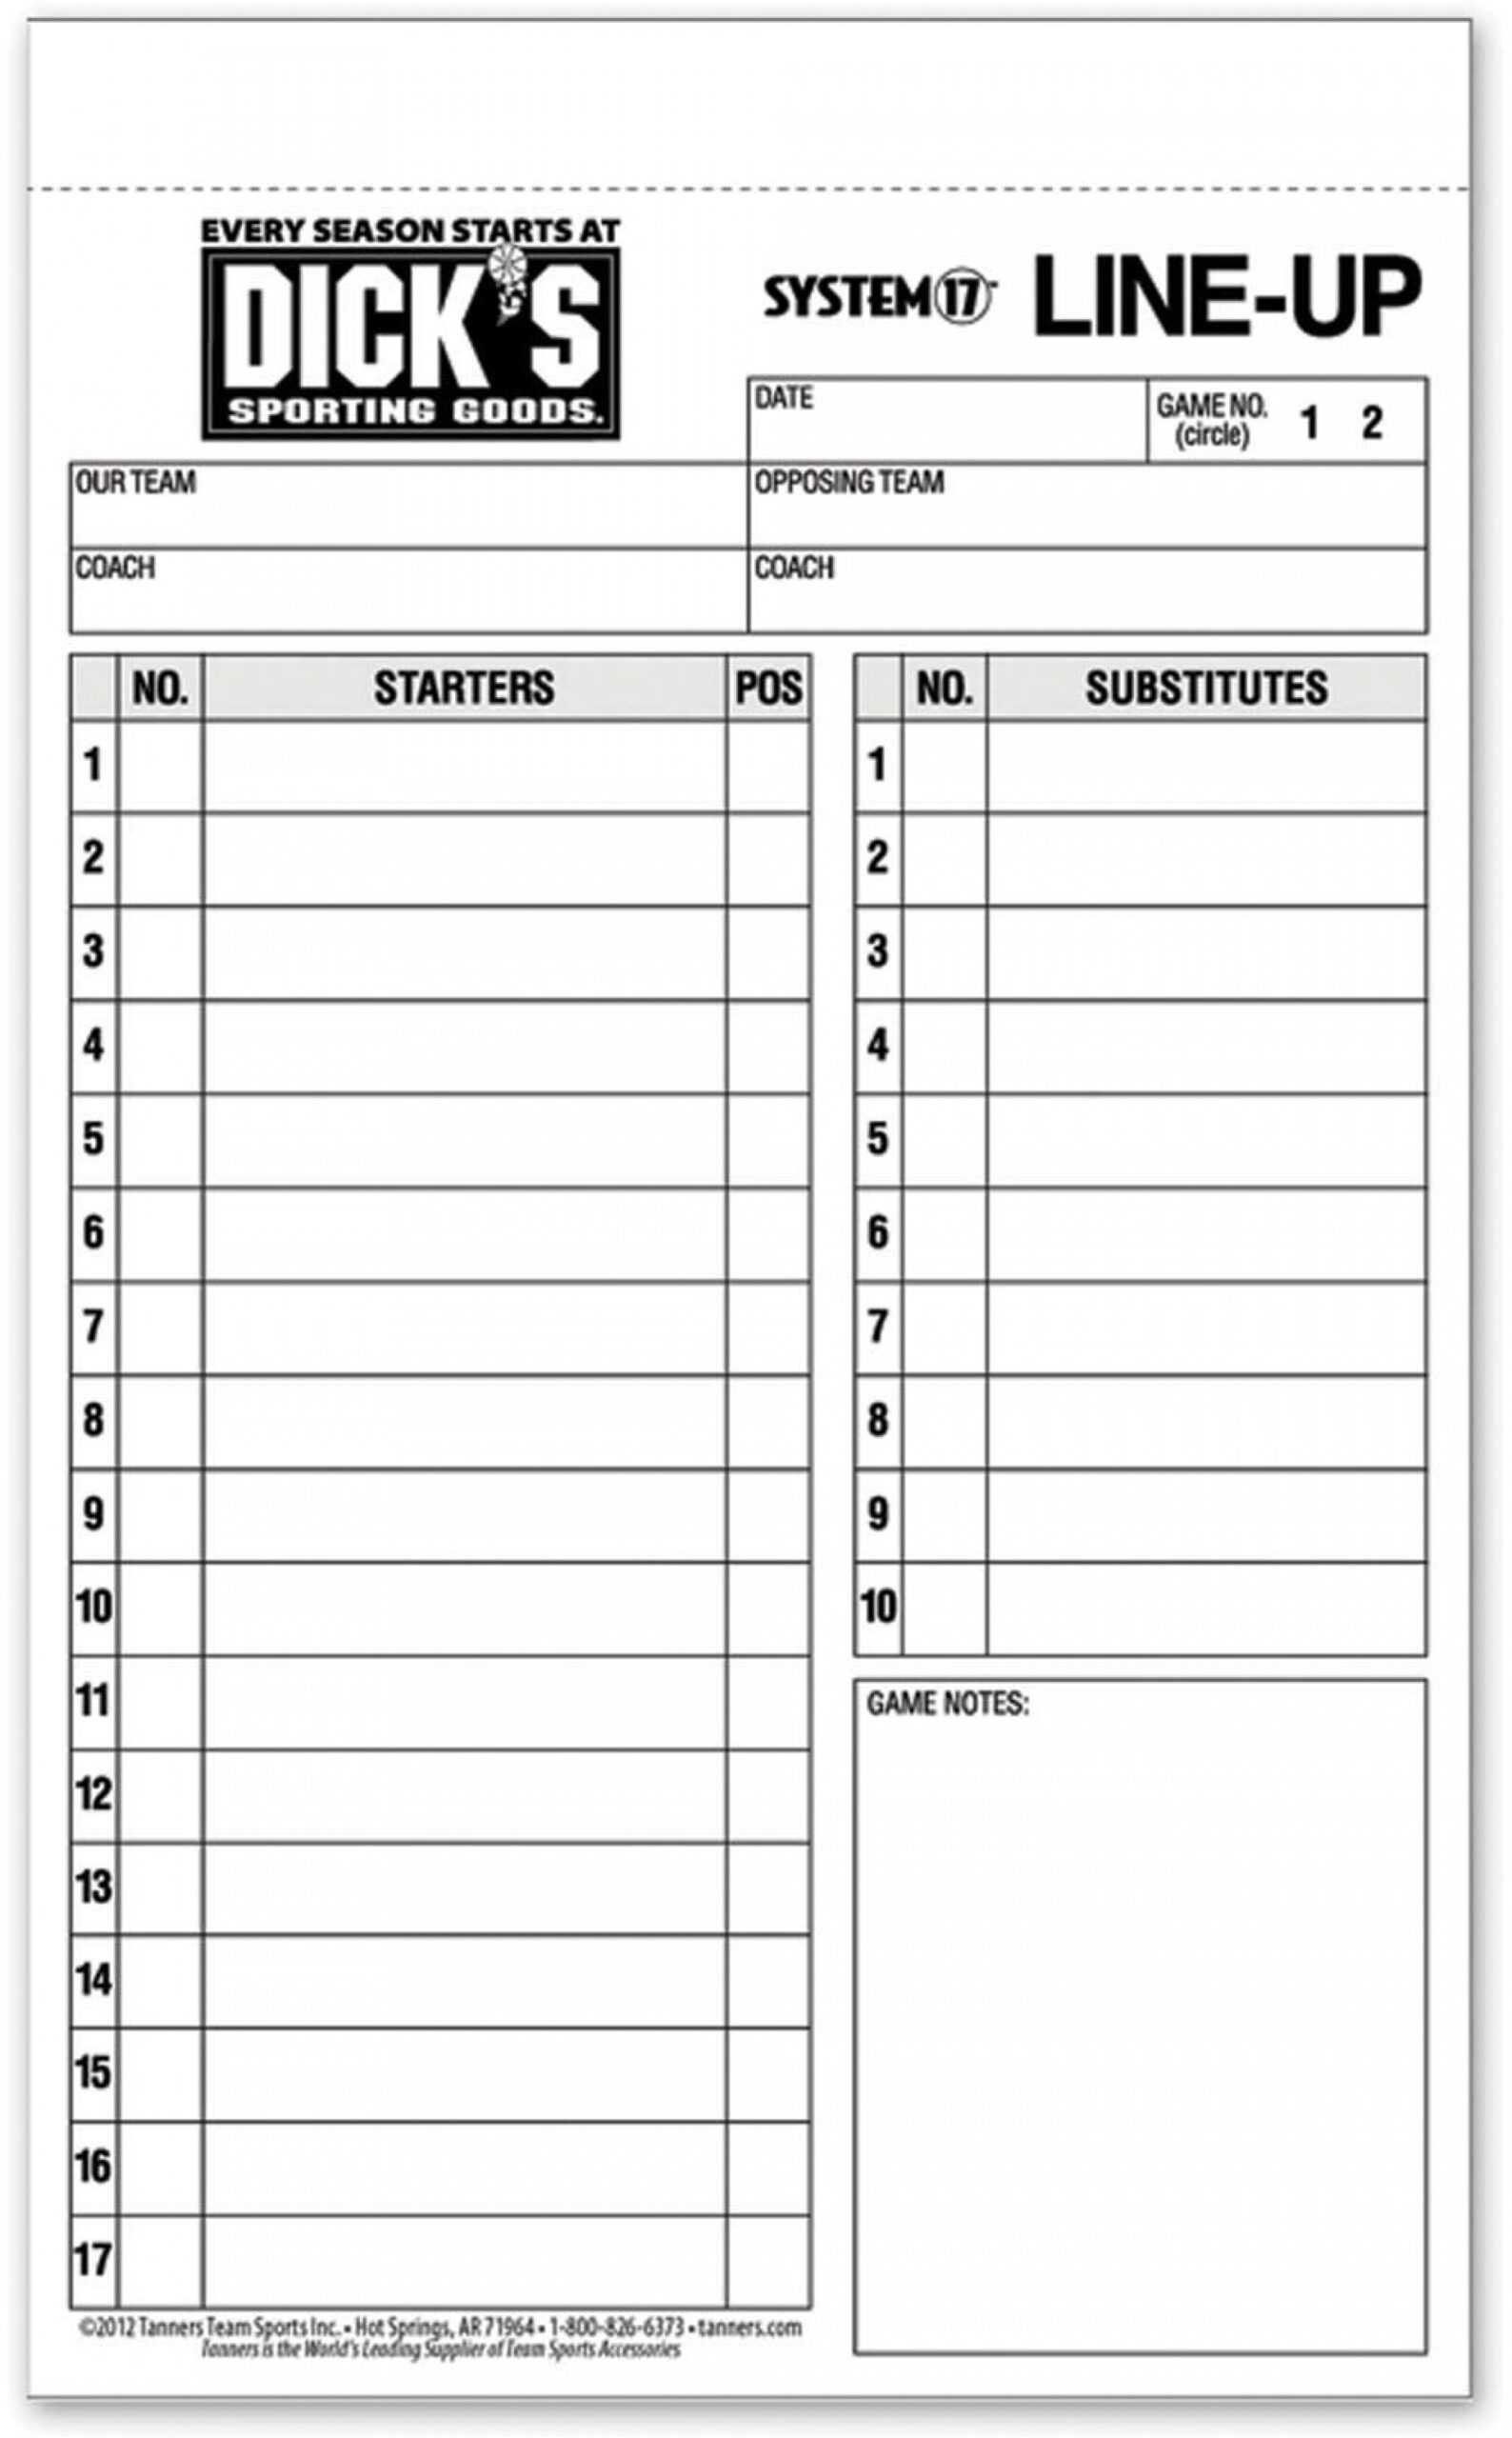 001 Free Baseball Lineup Card Template Excel Frightening Throughout Free Baseball Lineup Card Template